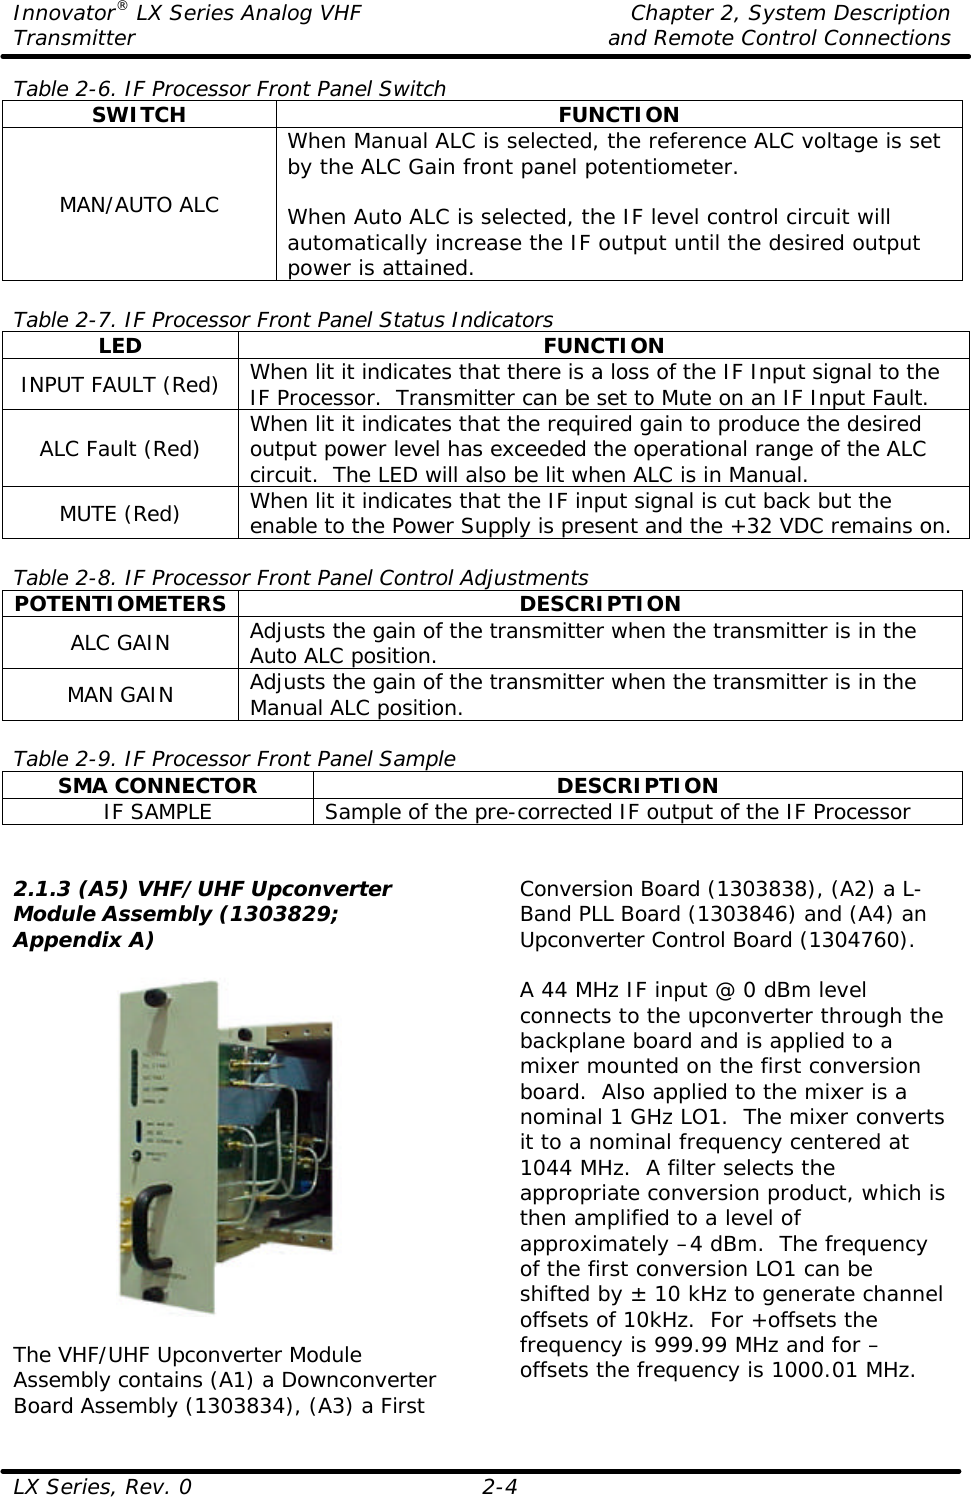 Innovator® LX Series Analog VHF    Chapter 2, System Description Transmitter    and Remote Control Connections  LX Series, Rev. 0 2-4 Table 2-6. IF Processor Front Panel Switch SWITCH FUNCTION MAN/AUTO ALC When Manual ALC is selected, the reference ALC voltage is set by the ALC Gain front panel potentiometer.   When Auto ALC is selected, the IF level control circuit will automatically increase the IF output until the desired output power is attained.  Table 2-7. IF Processor Front Panel Status Indicators LED FUNCTION INPUT FAULT (Red) When lit it indicates that there is a loss of the IF Input signal to the IF Processor.  Transmitter can be set to Mute on an IF Input Fault. ALC Fault (Red) When lit it indicates that the required gain to produce the desired output power level has exceeded the operational range of the ALC circuit.  The LED will also be lit when ALC is in Manual. MUTE (Red) When lit it indicates that the IF input signal is cut back but the enable to the Power Supply is present and the +32 VDC remains on.  Table 2-8. IF Processor Front Panel Control Adjustments POTENTIOMETERS DESCRIPTION ALC GAIN Adjusts the gain of the transmitter when the transmitter is in the Auto ALC position. MAN GAIN Adjusts the gain of the transmitter when the transmitter is in the Manual ALC position.  Table 2-9. IF Processor Front Panel Sample SMA CONNECTOR DESCRIPTION IF SAMPLE Sample of the pre-corrected IF output of the IF Processor   2.1.3 (A5) VHF/UHF Upconverter Module Assembly (1303829; Appendix A)    The VHF/UHF Upconverter Module Assembly contains (A1) a Downconverter Board Assembly (1303834), (A3) a First Conversion Board (1303838), (A2) a L-Band PLL Board (1303846) and (A4) an Upconverter Control Board (1304760).  A 44 MHz IF input @ 0 dBm level connects to the upconverter through the backplane board and is applied to a mixer mounted on the first conversion board.  Also applied to the mixer is a nominal 1 GHz LO1.  The mixer converts it to a nominal frequency centered at 1044 MHz.  A filter selects the appropriate conversion product, which is then amplified to a level of approximately –4 dBm.  The frequency of the first conversion LO1 can be shifted by ± 10 kHz to generate channel offsets of 10kHz.  For +offsets the frequency is 999.99 MHz and for –offsets the frequency is 1000.01 MHz. 